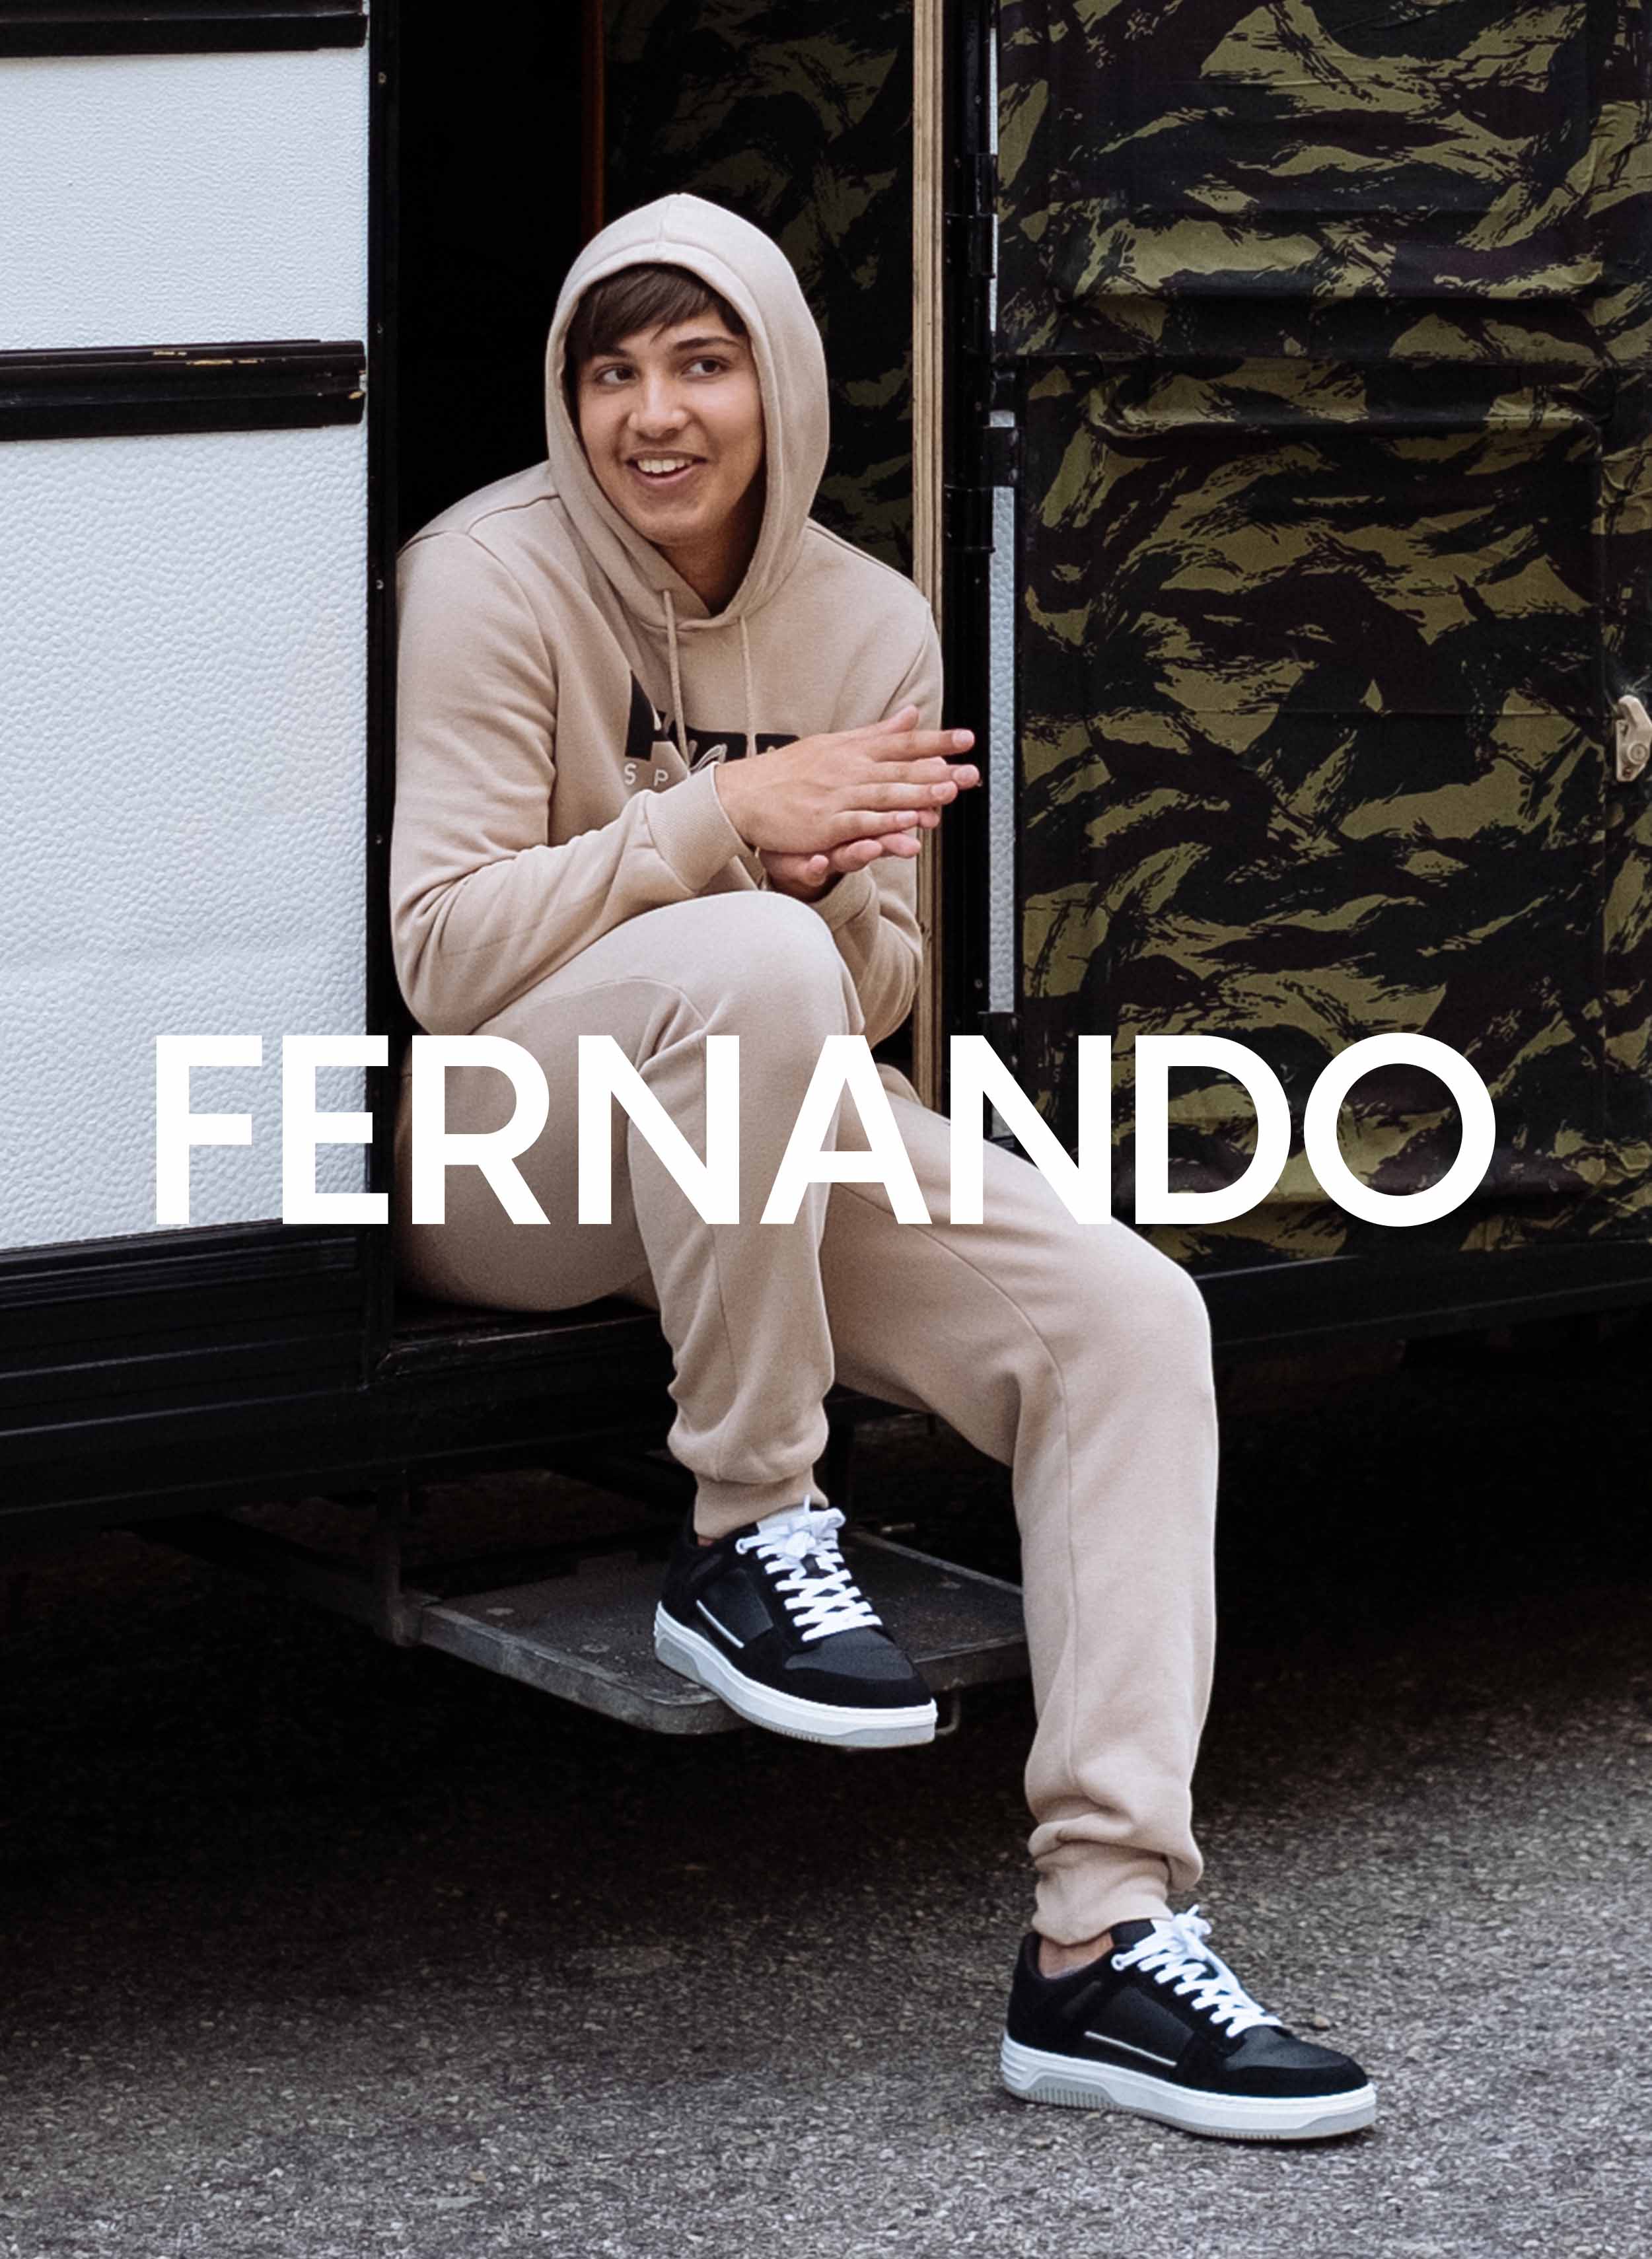 Fernando sitting in a motorhome, wearing Diverge sneakers, promoting social impact and custom shoes throught the imagine project.